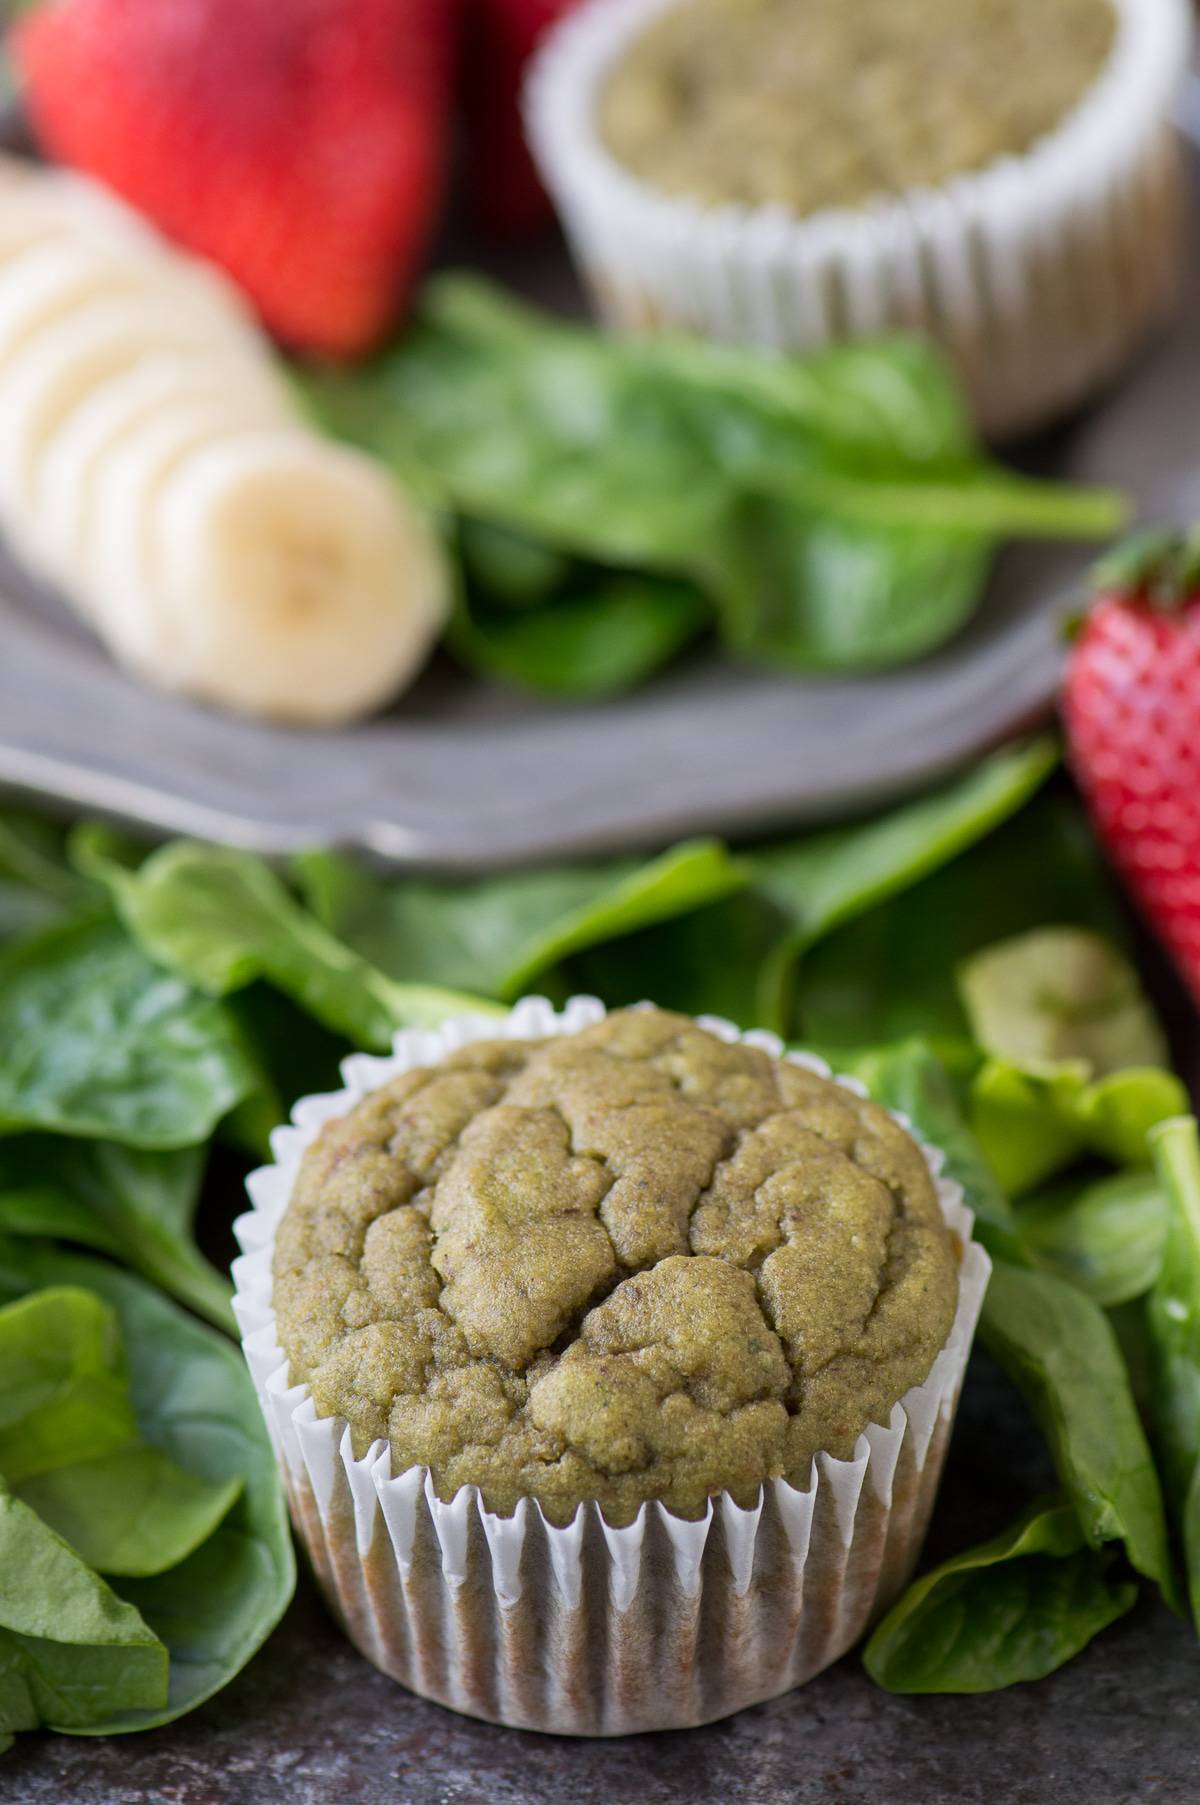 Green Monster Smoothie Muffin surrounded by spinach, bananas and strawberries.